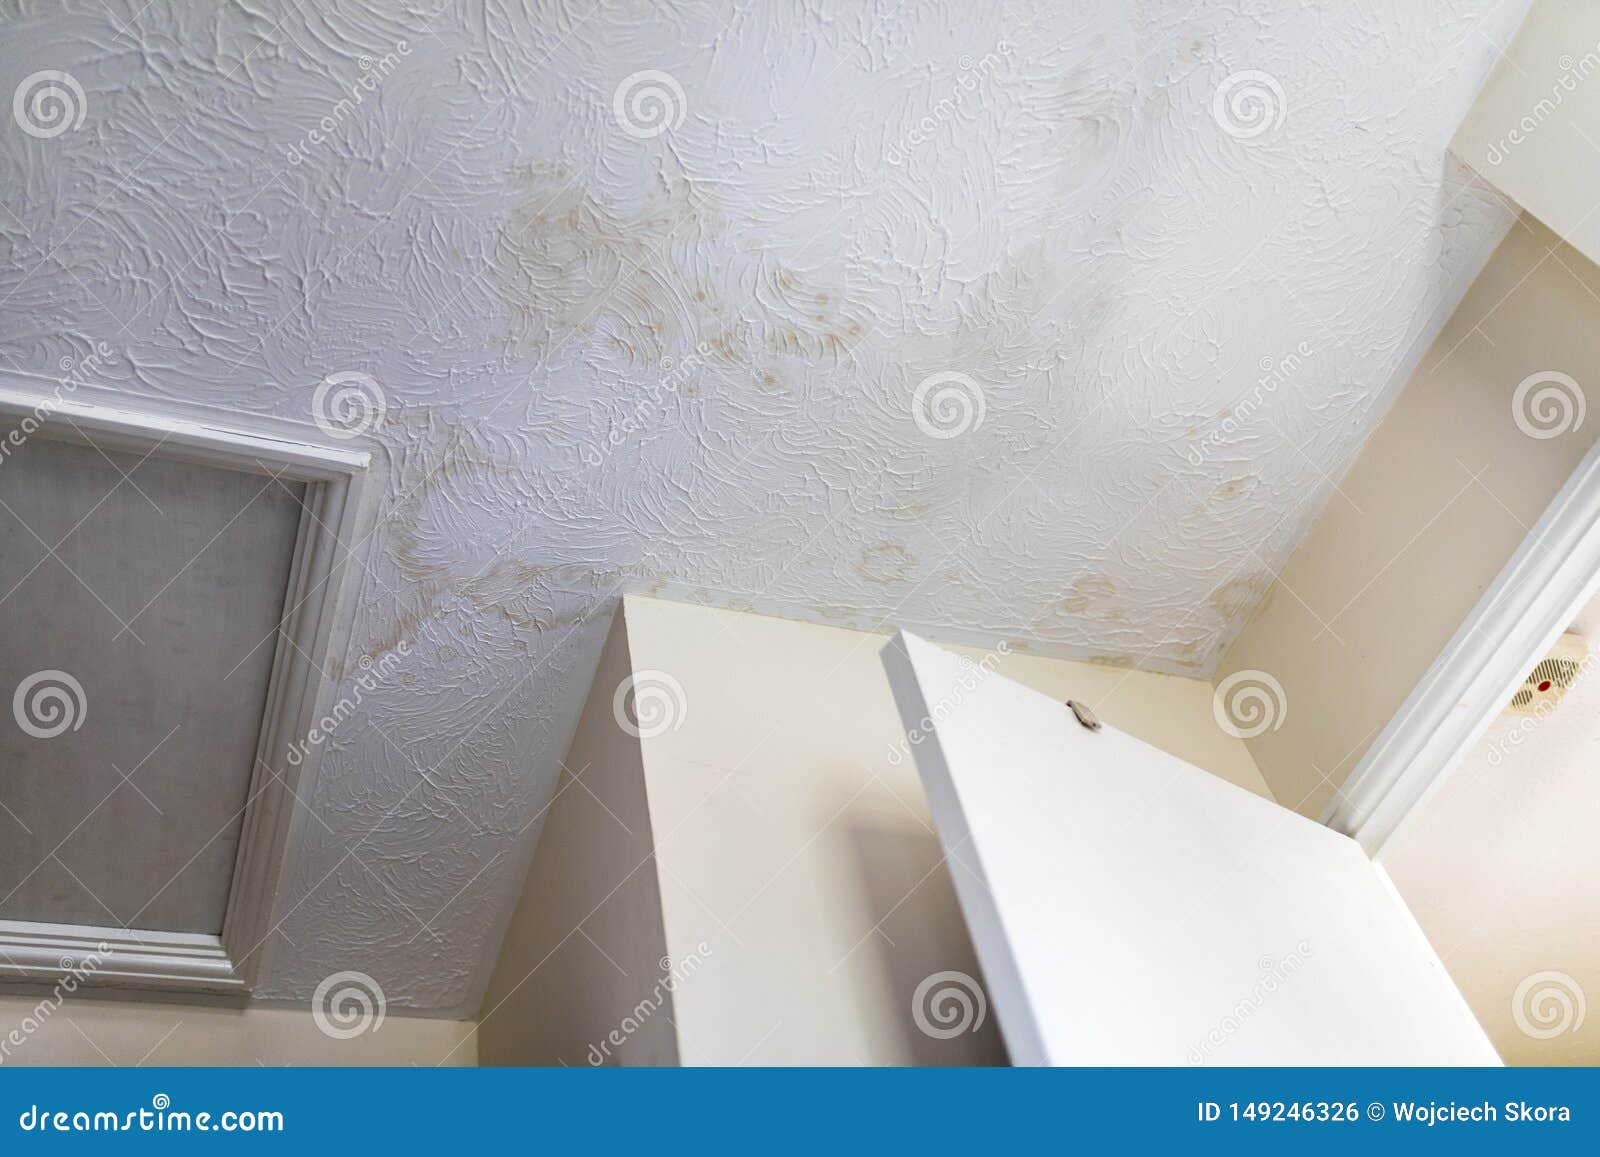 stains on the ceiling after water leakage, humidity on wall